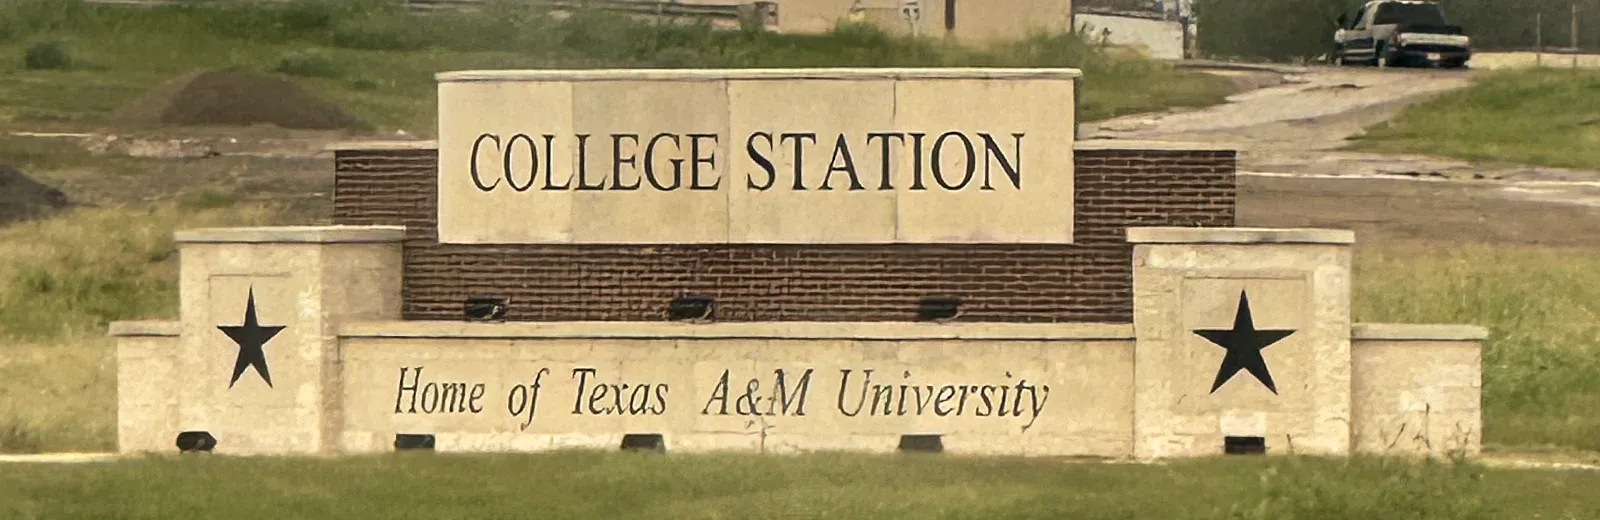 College Station sign